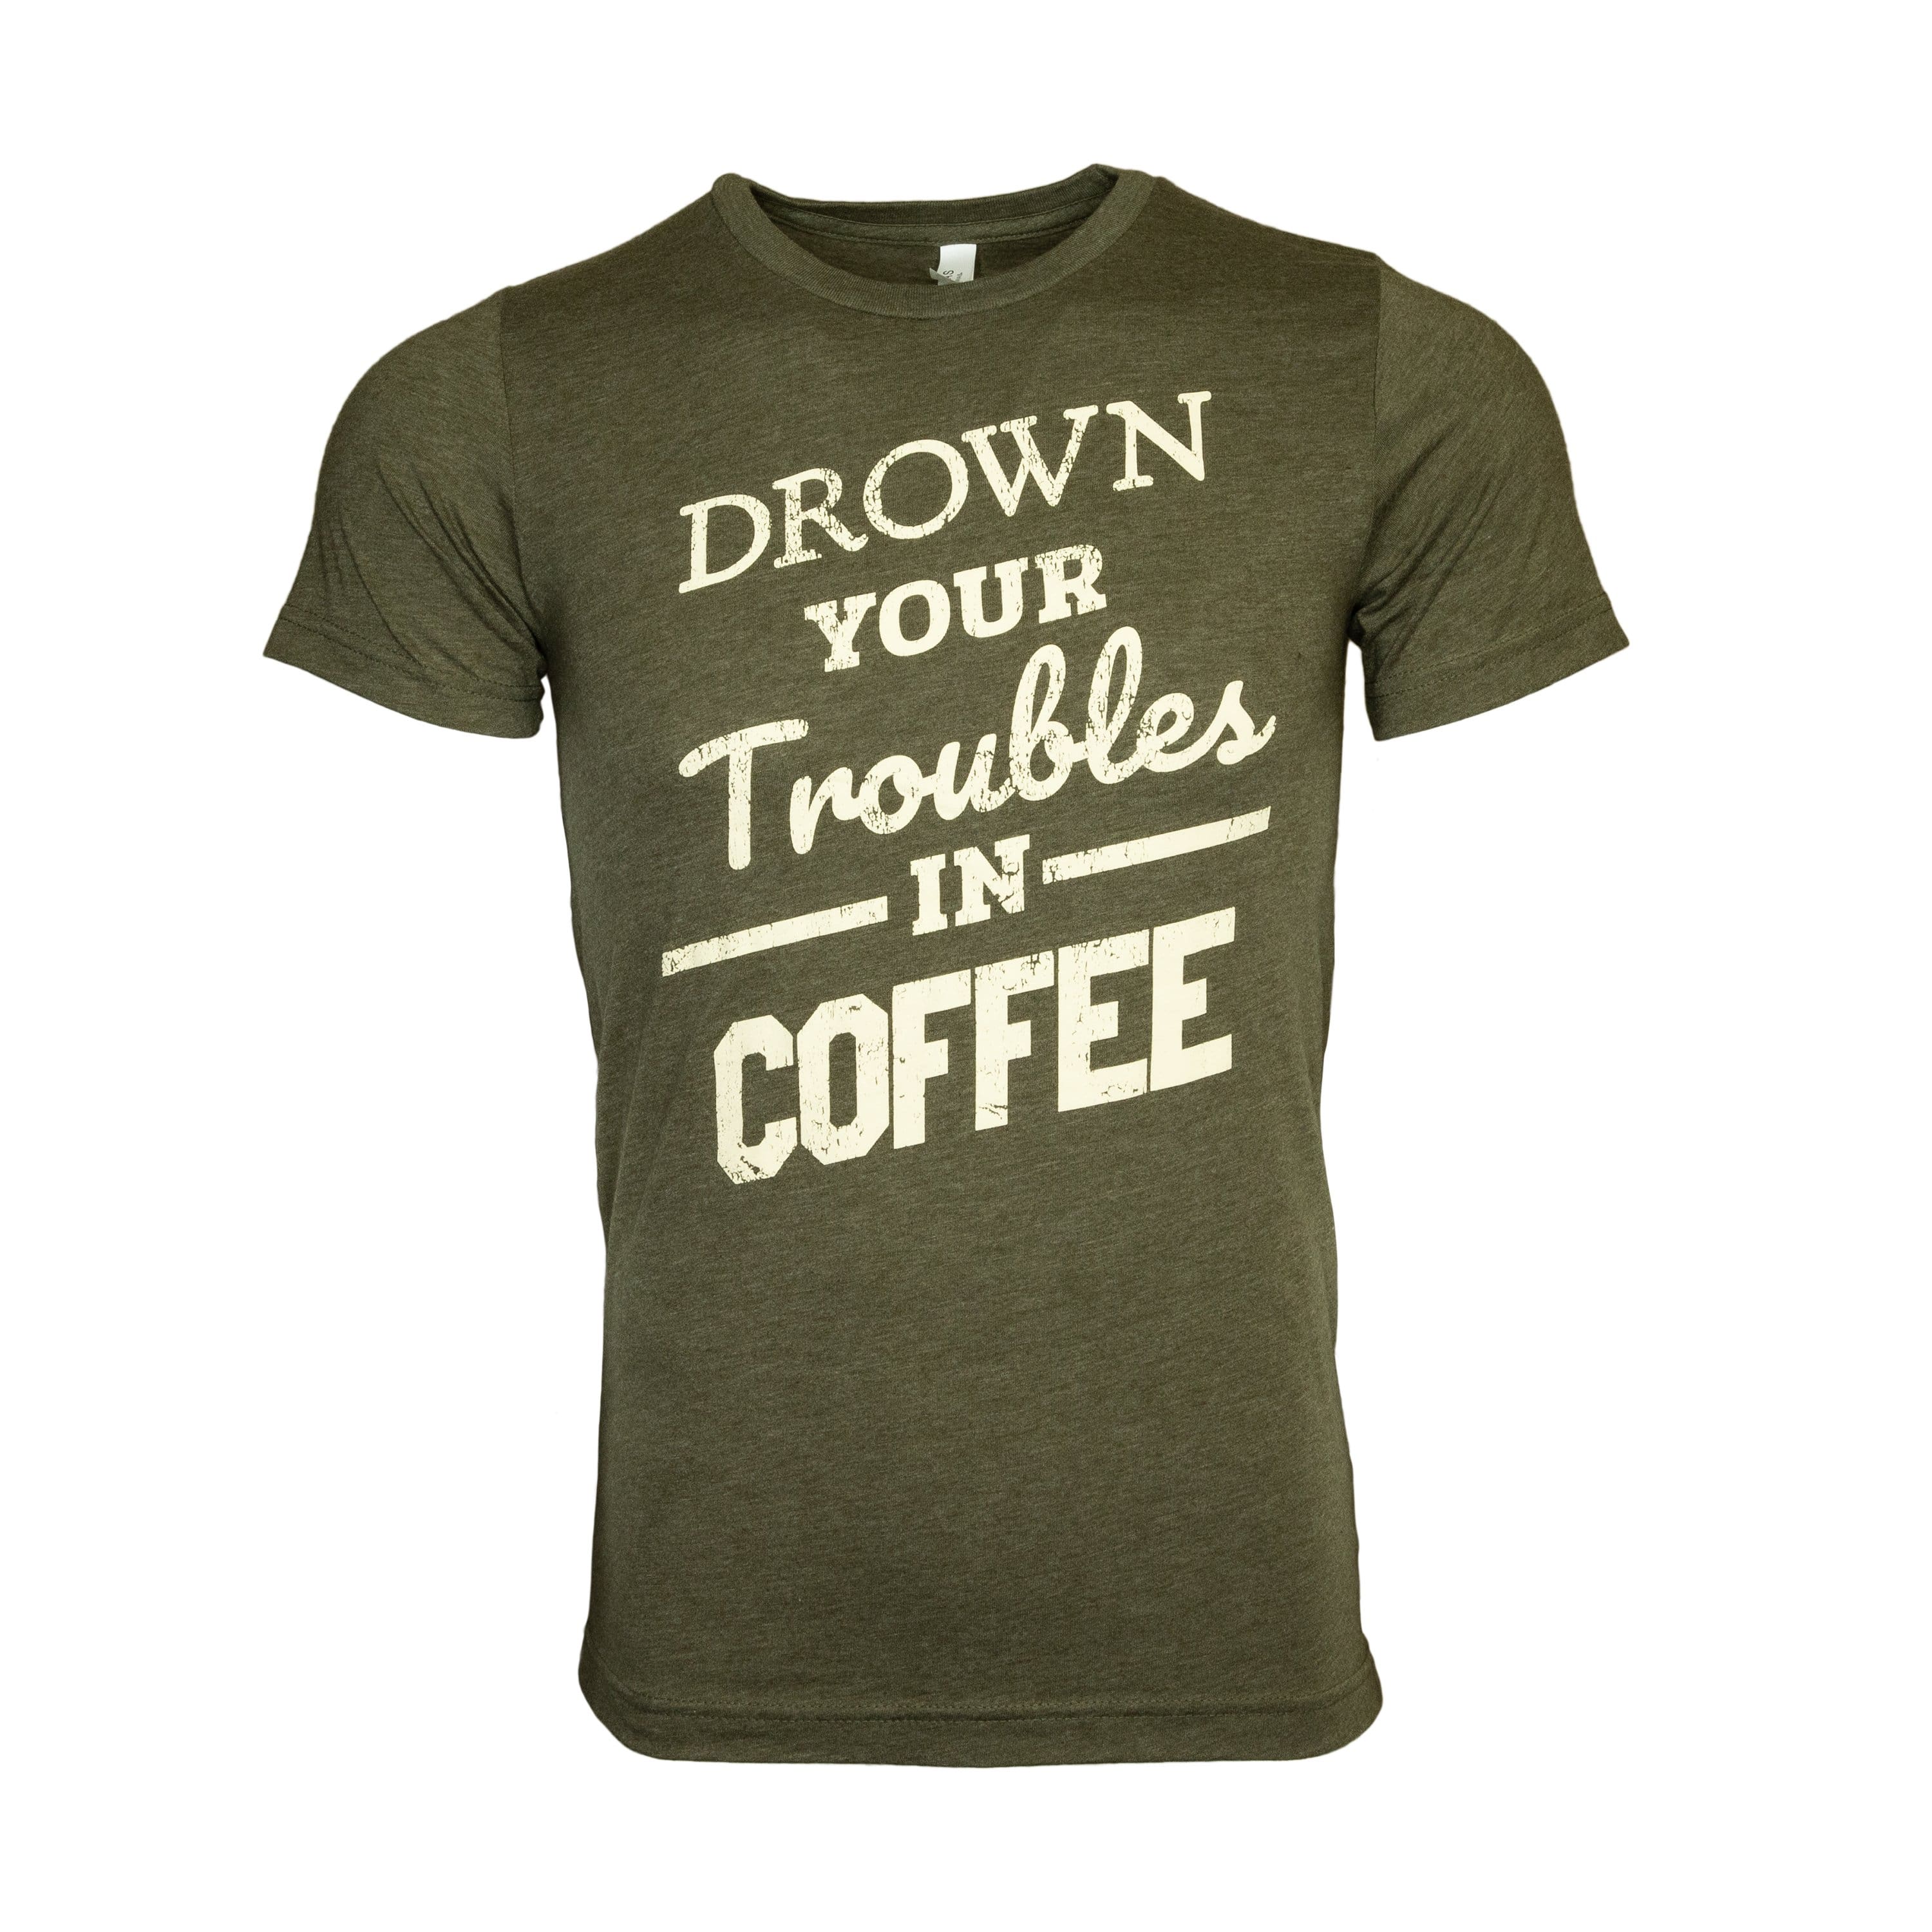 Coffee Talk - Drown Your Troubles in Coffee Tee